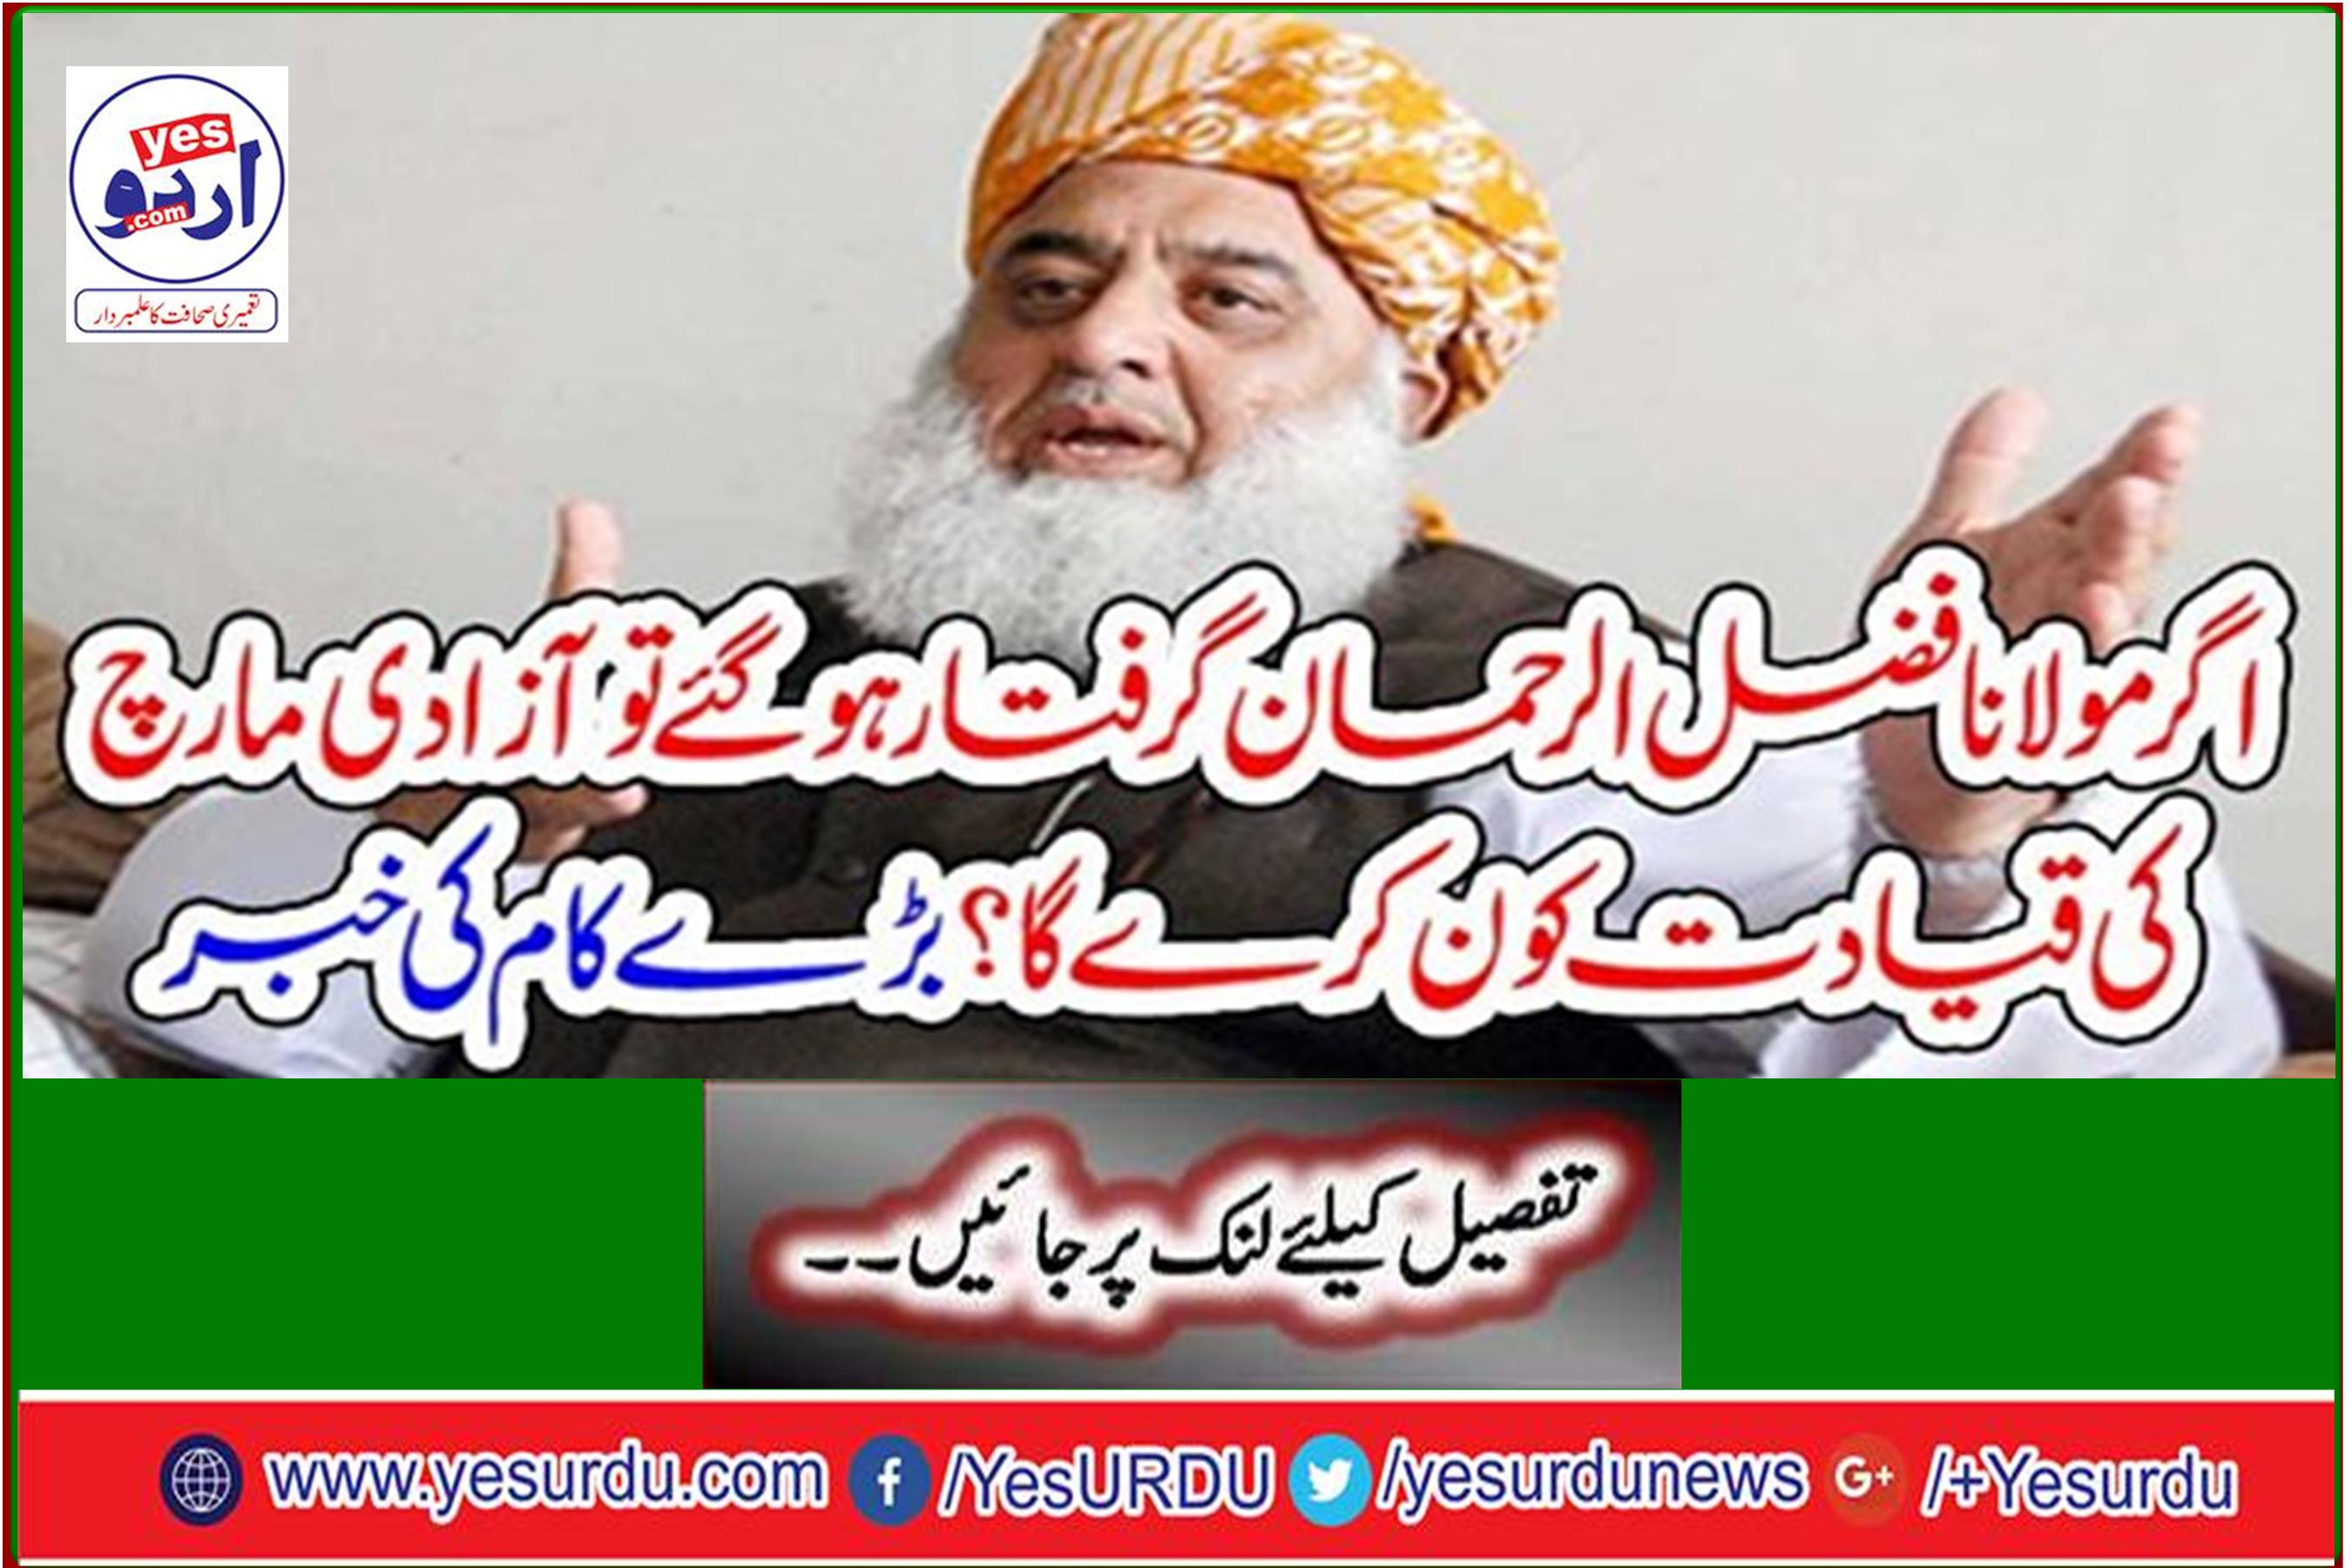 If Mullan Fazlur Rehman is arrested, who will lead the liberation march? Great job news